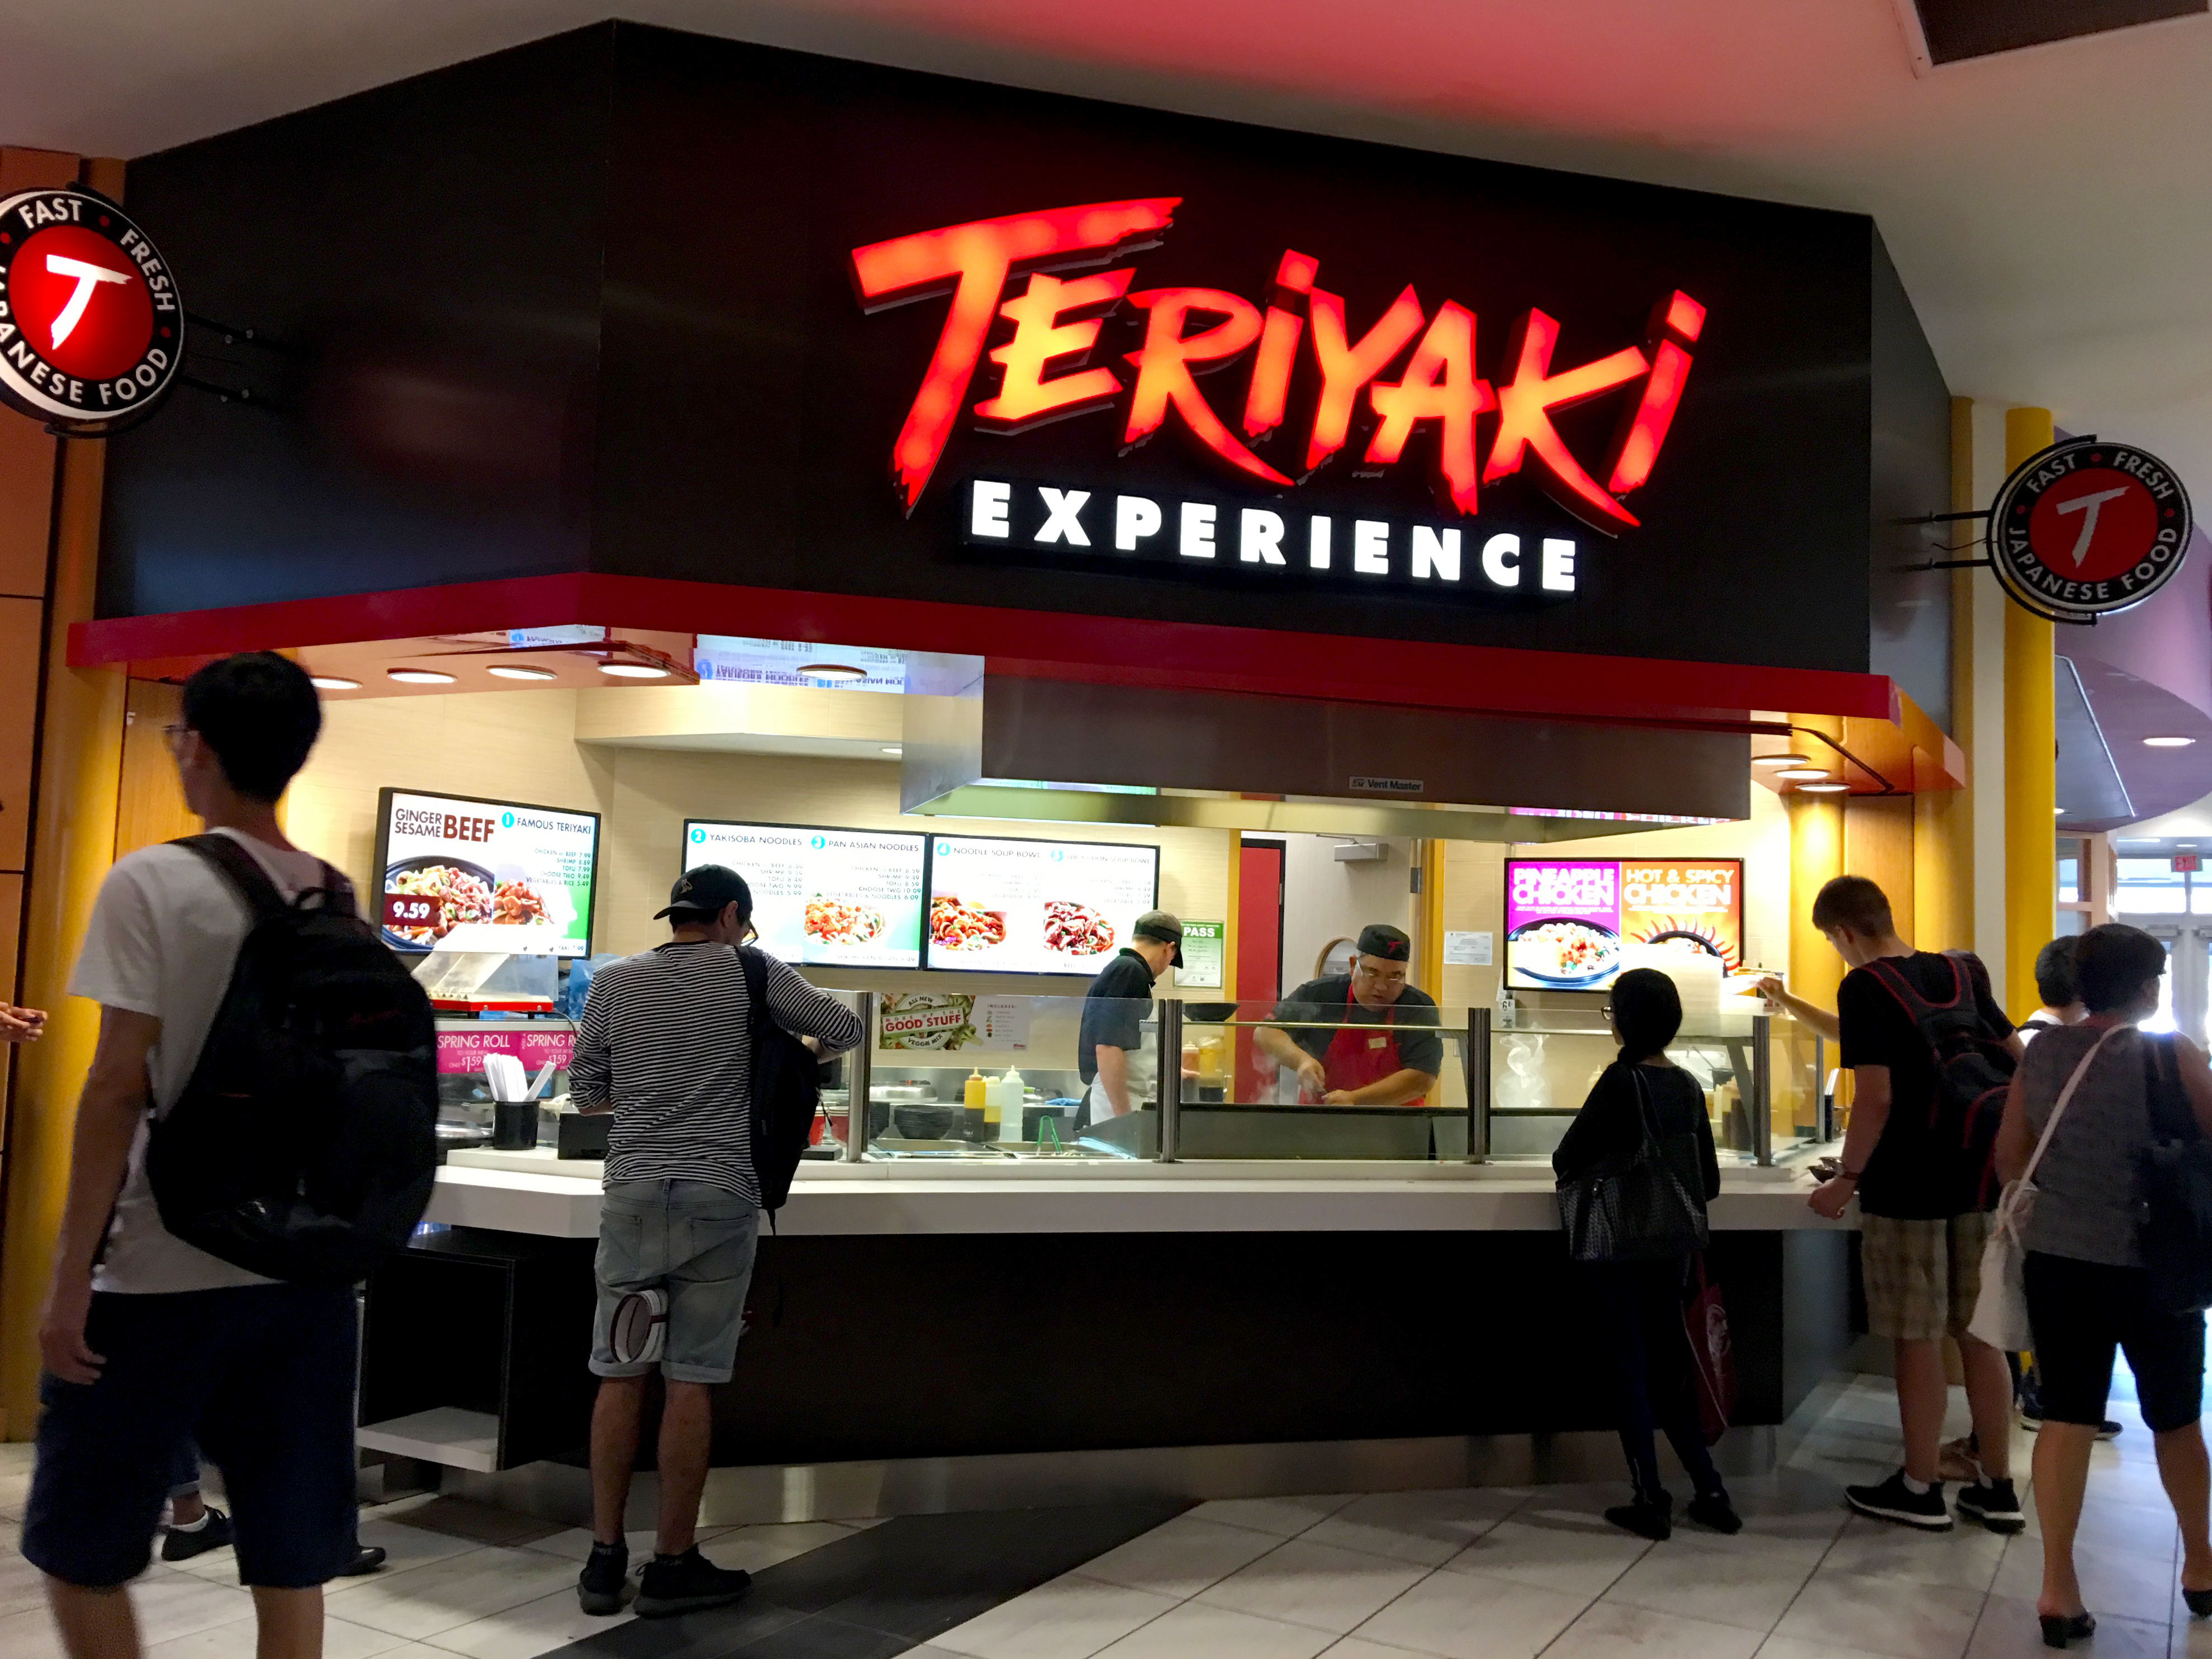 View of Teriyaki Experience restaurant with customers in front waiting